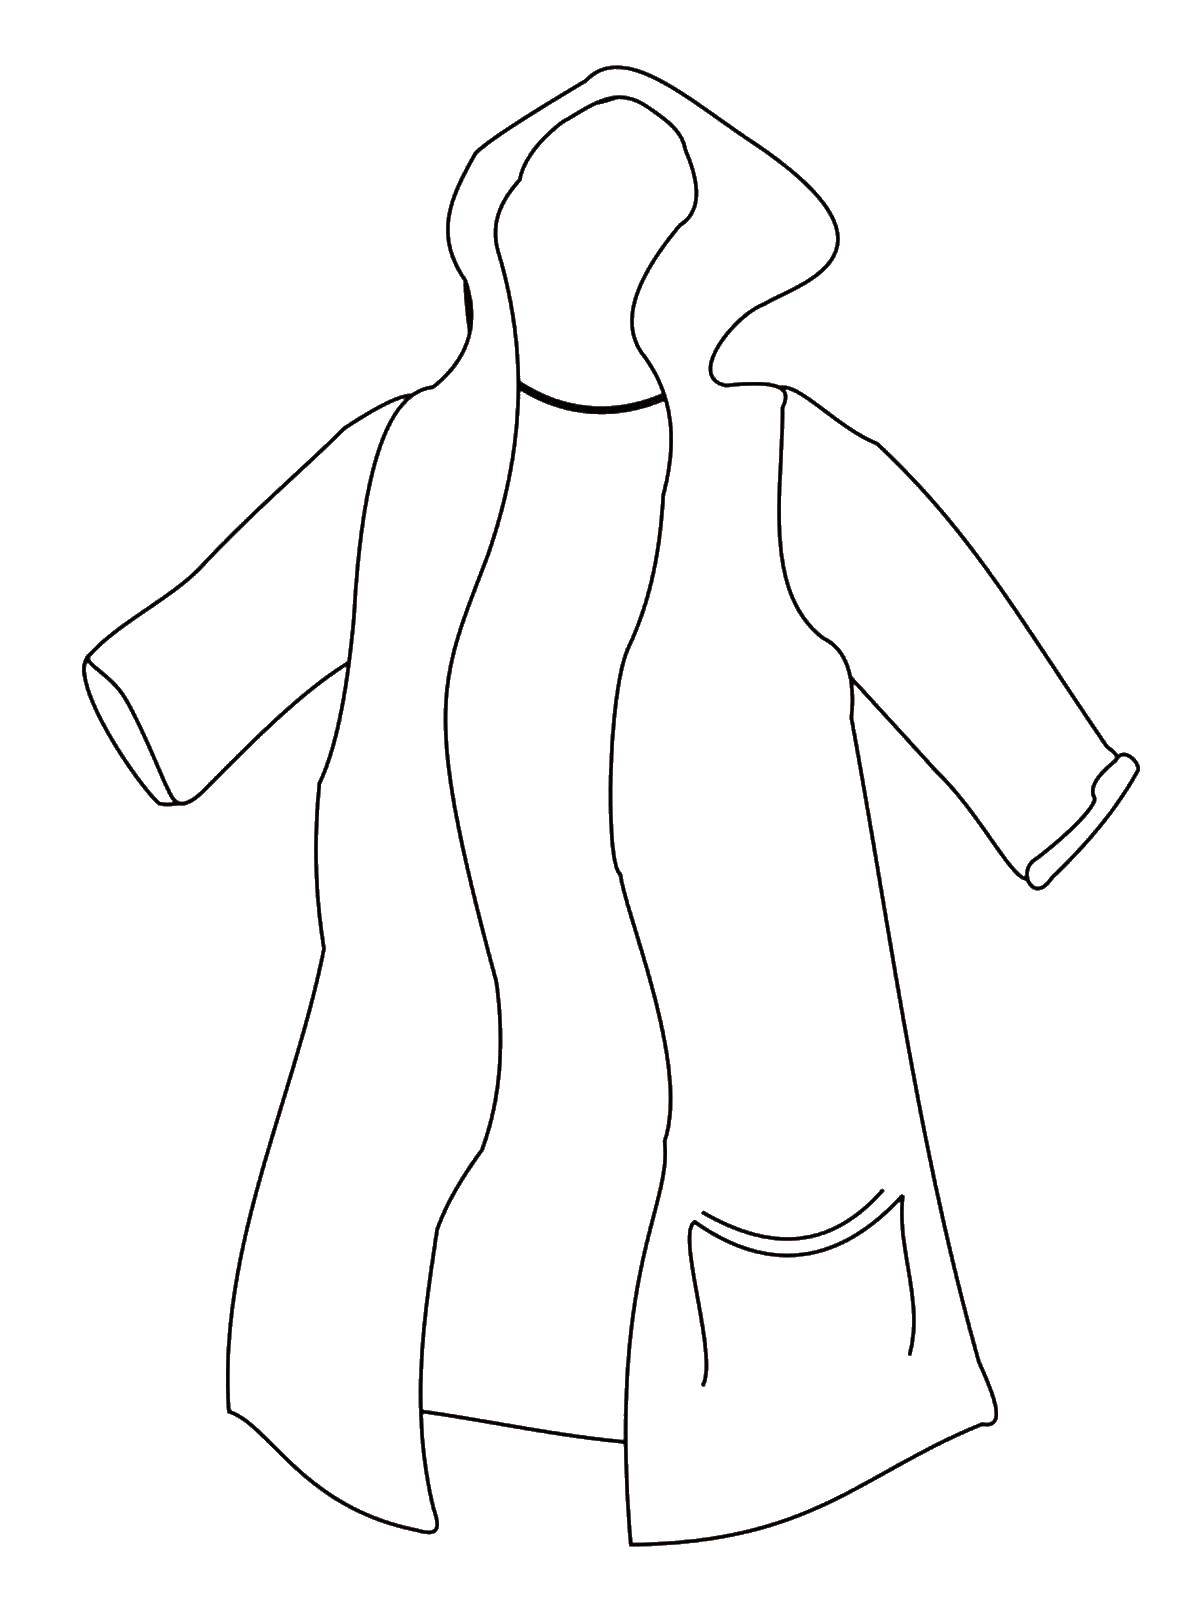 Coloring Cloak. Category clothing. Tags:  cloak.